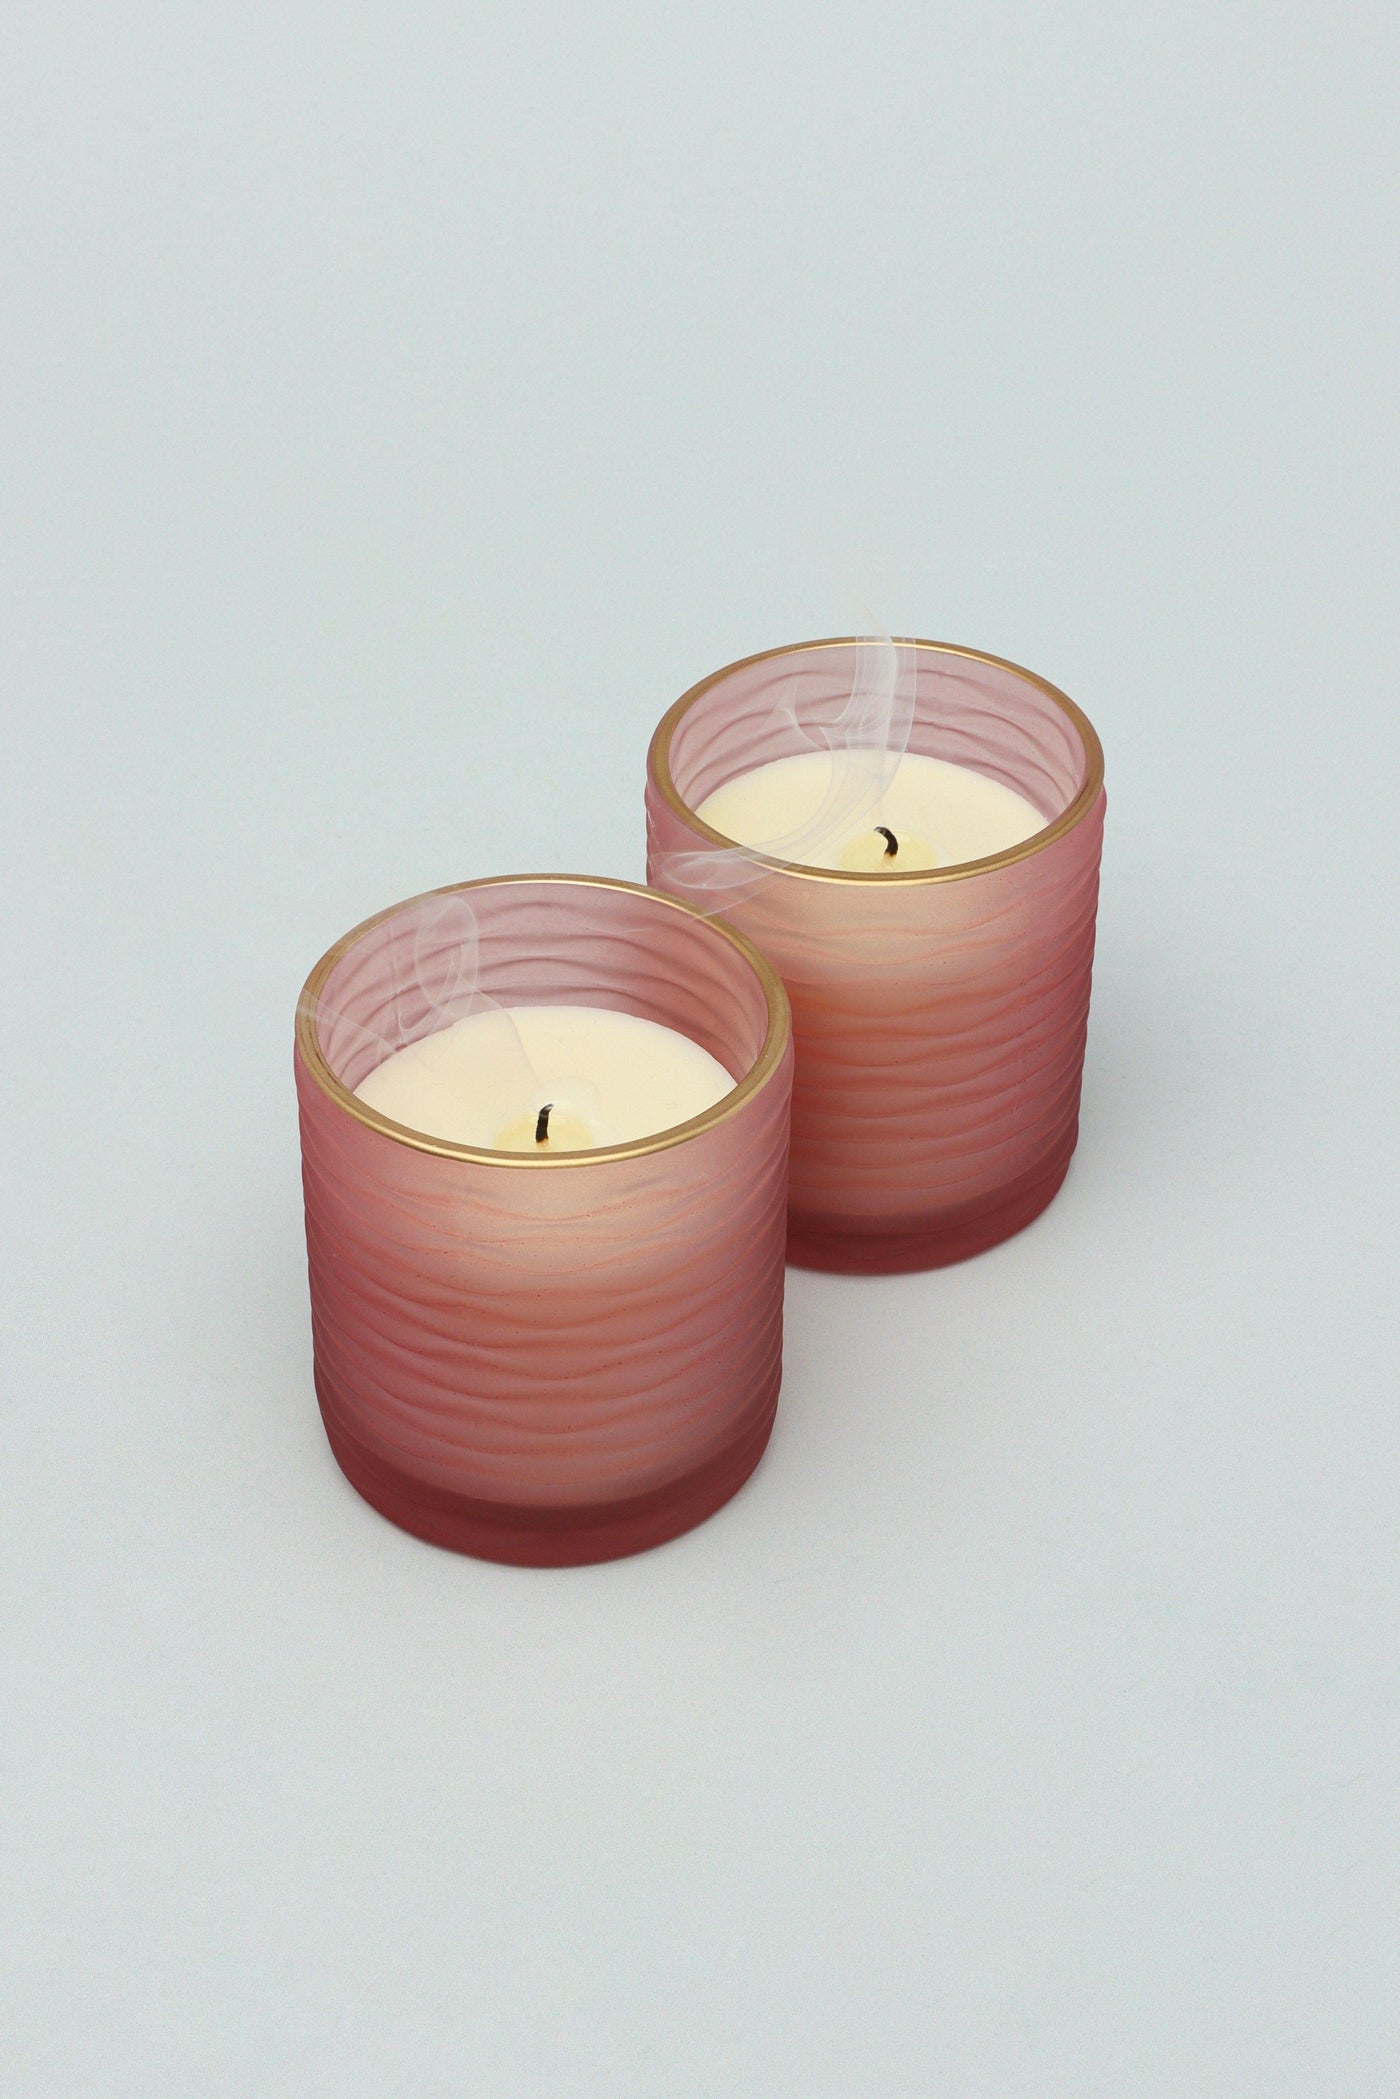 G Decor Candles & Candle Holders Pastel Pink Havana Floral Scented Pastel Pink Textured Glass Jars